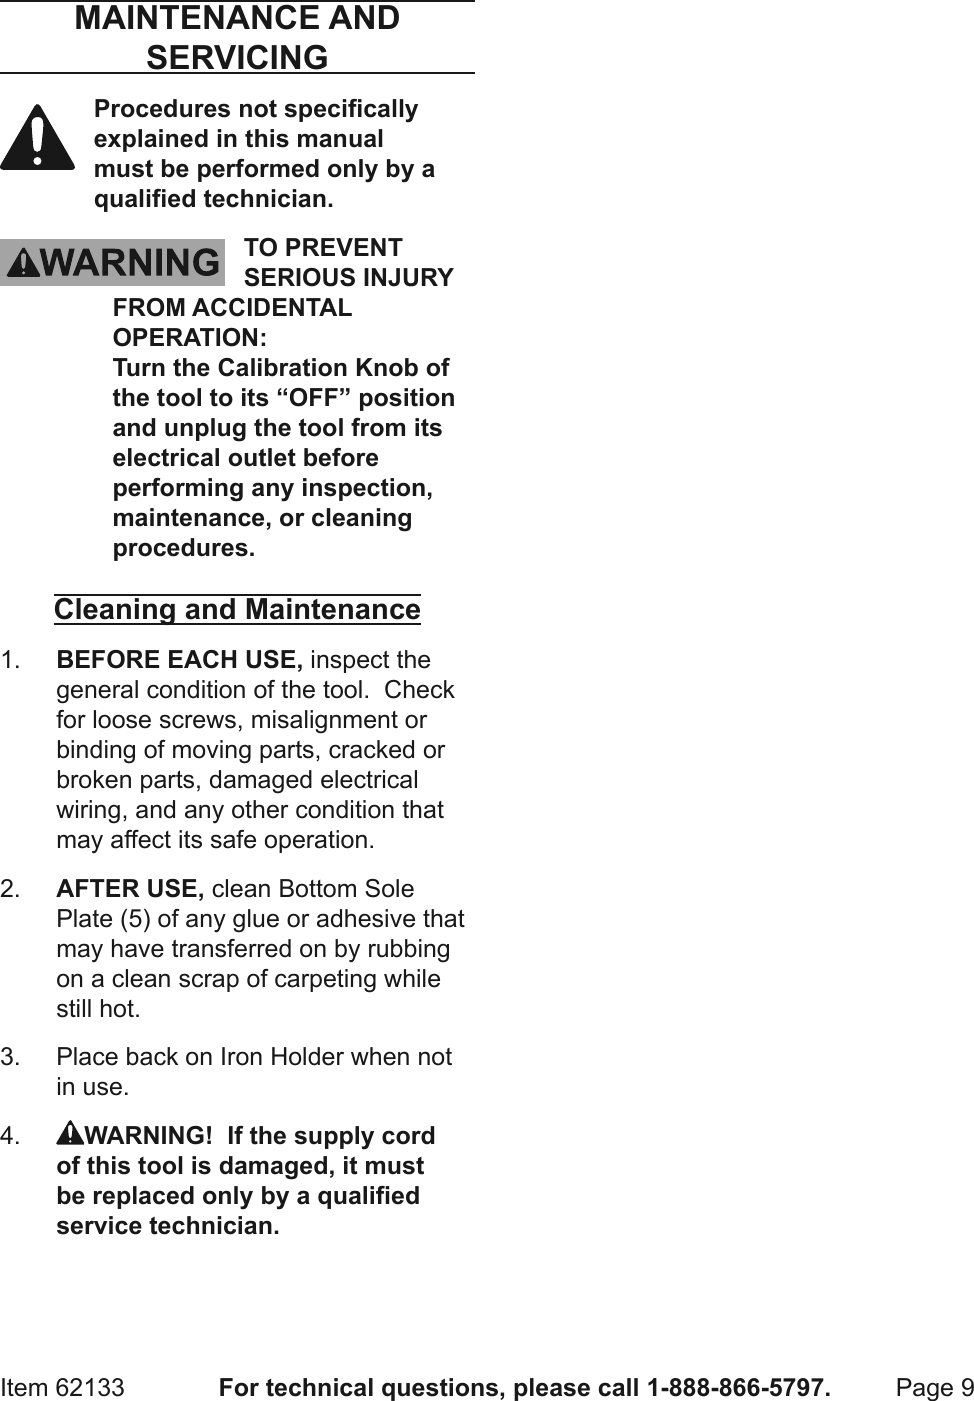 Page 9 of 12 - Harbor-Freight Harbor-Freight-Heat-Bond-Carpet-Seaming-Iron-Product-Manual-  Harbor-freight-heat-bond-carpet-seaming-iron-product-manual